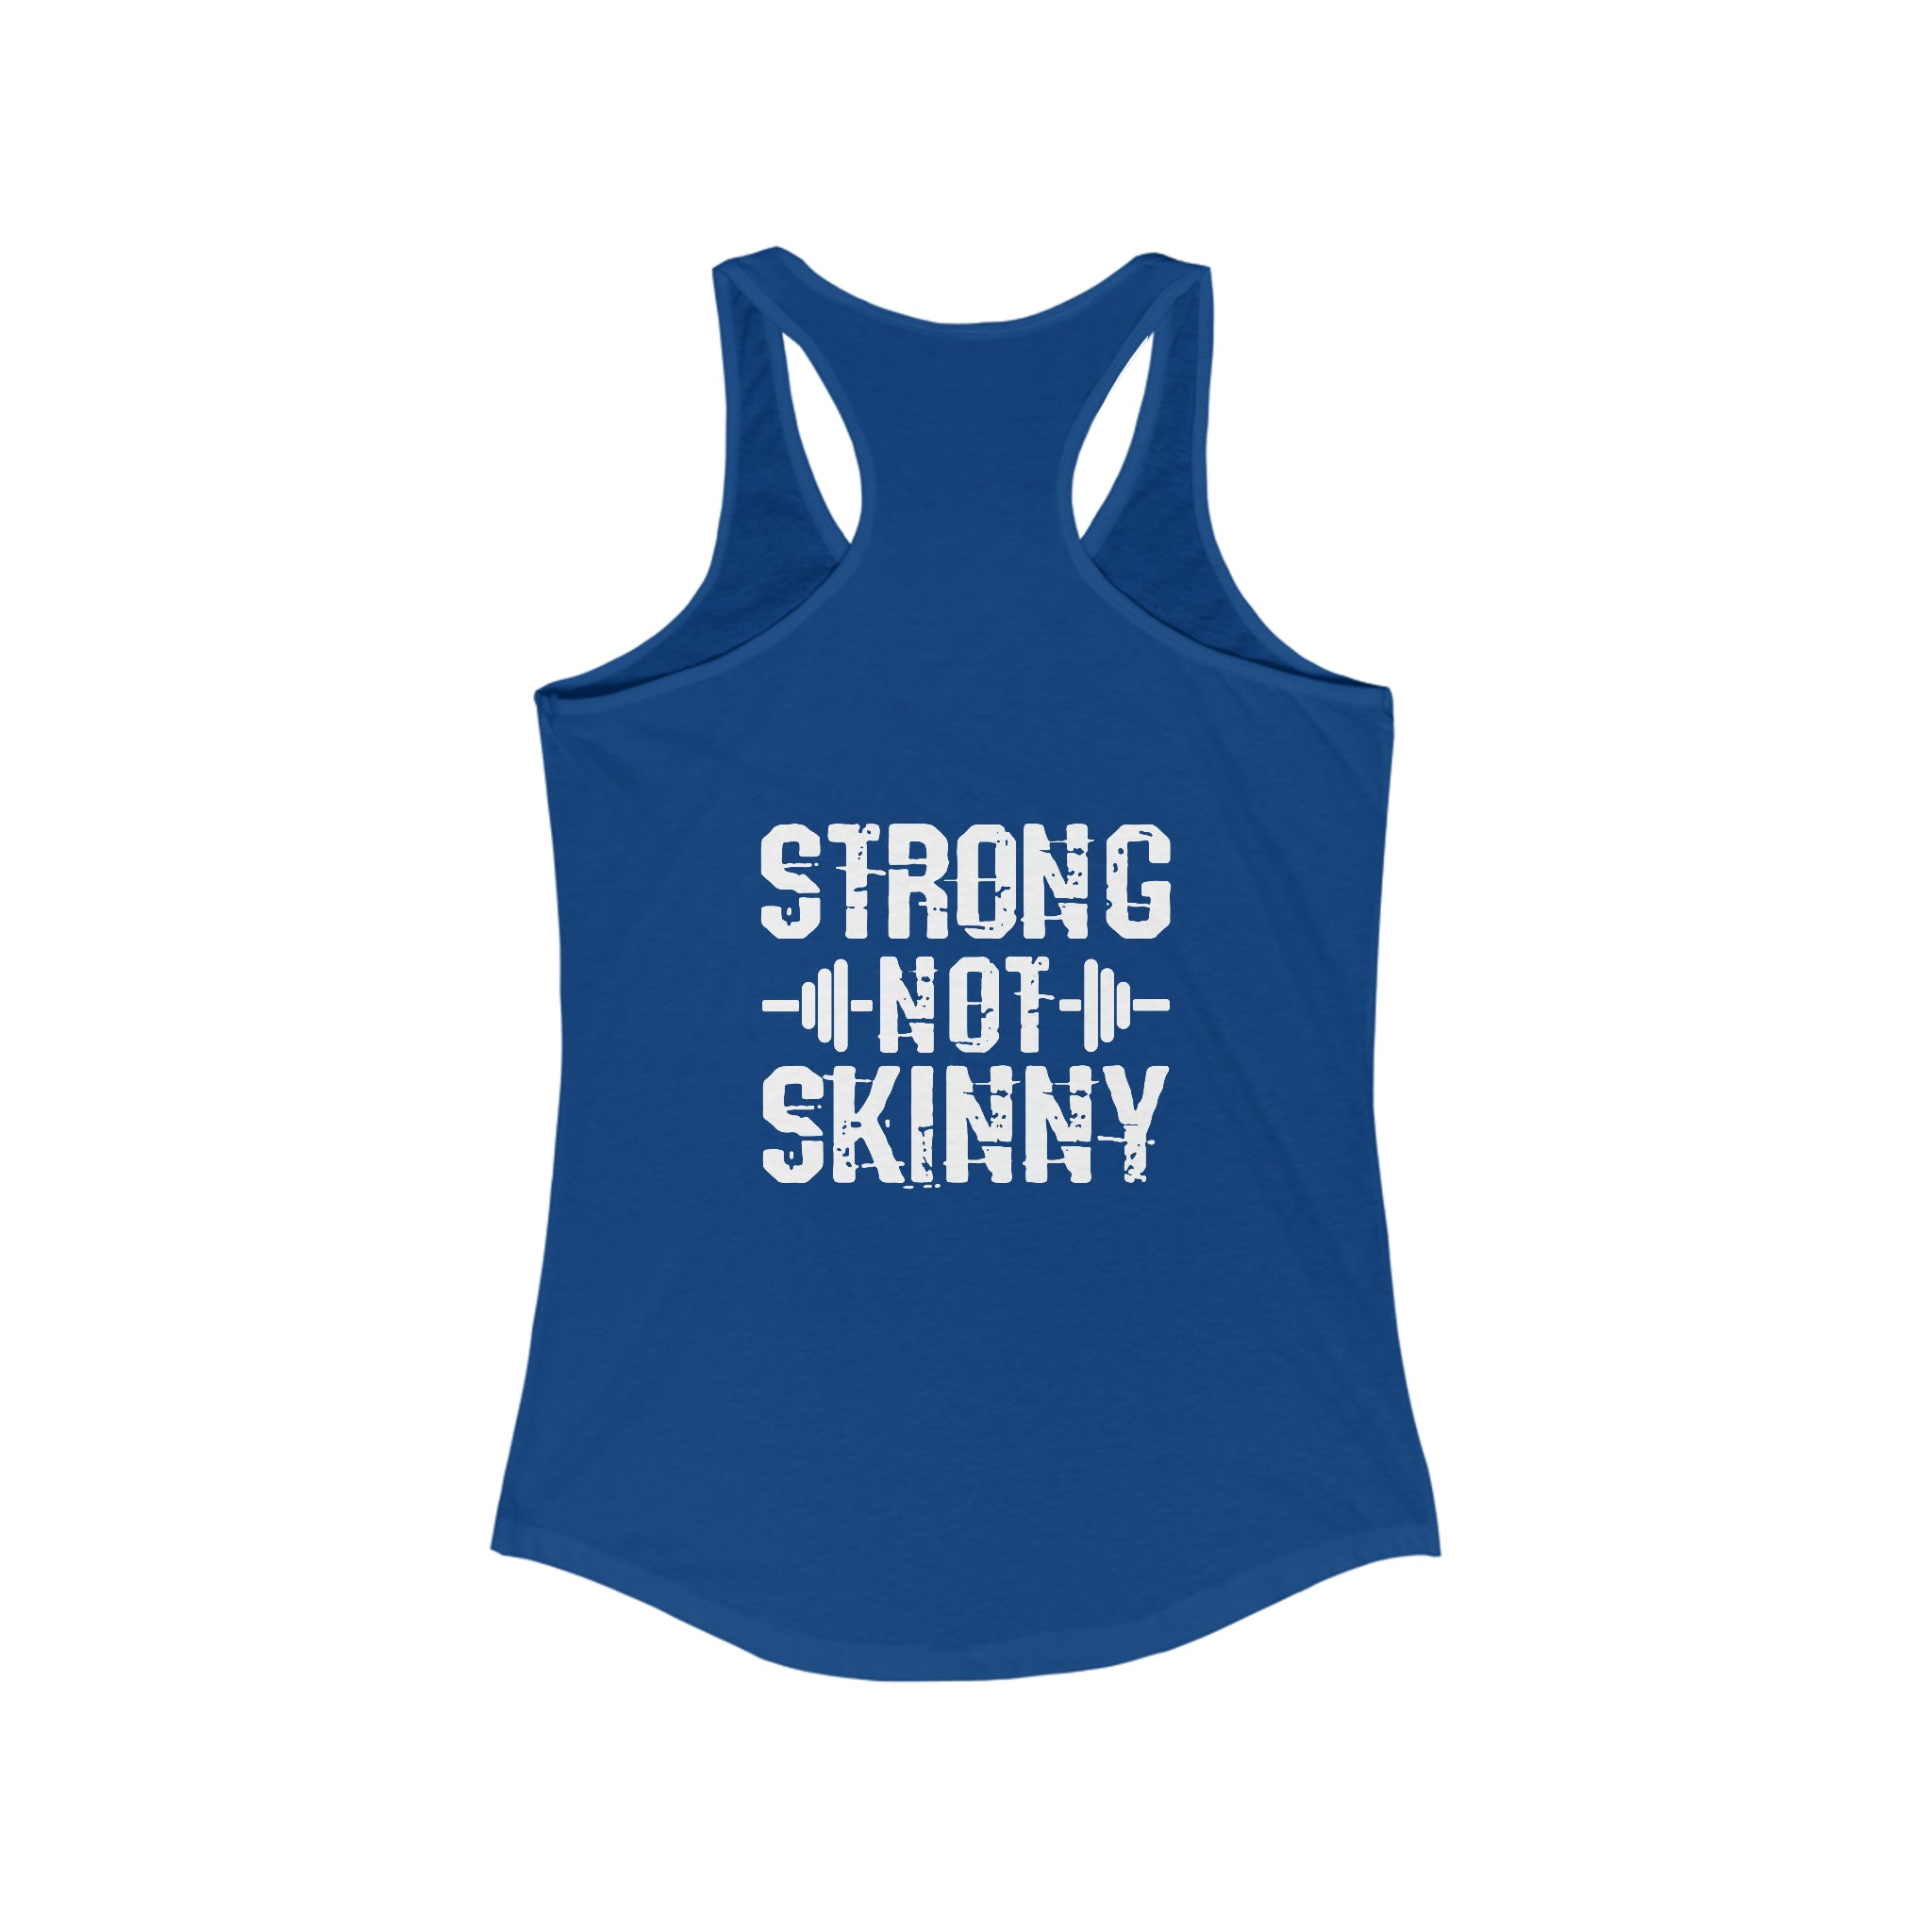 Strong is the New Skinny Flowy Muscle Tank